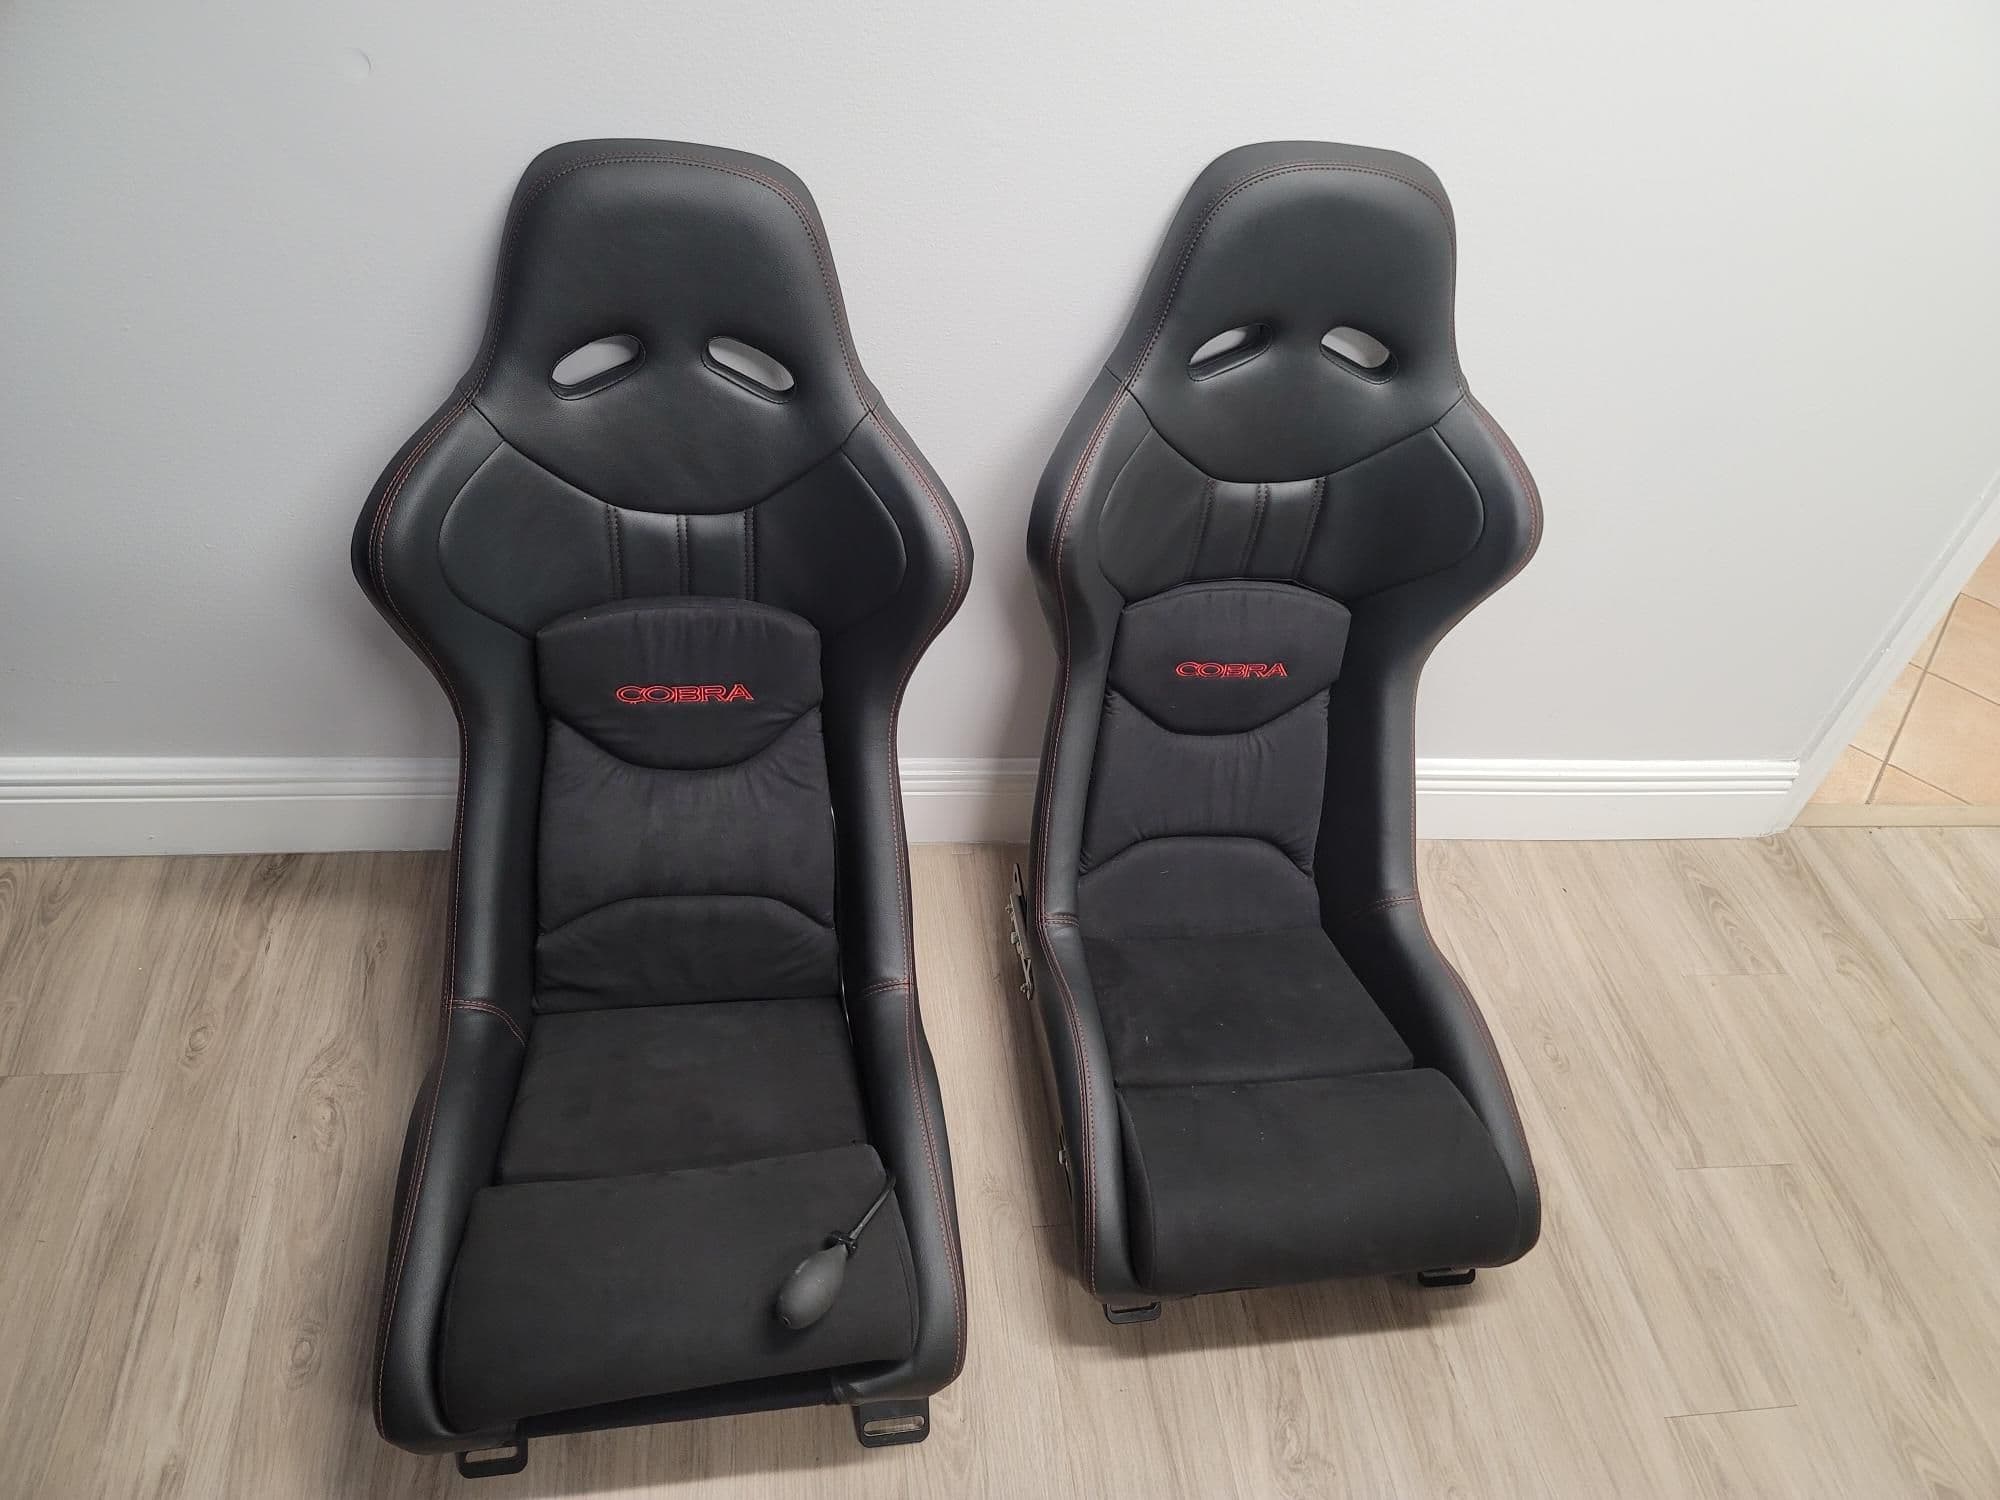 Interior/Upholstery - New Cobra Nogaro racing buckets with Garage Star adjustable bases for RX7 FD - New - 1993 to 1995 Mazda RX-7 - Miami, FL 33126, United States